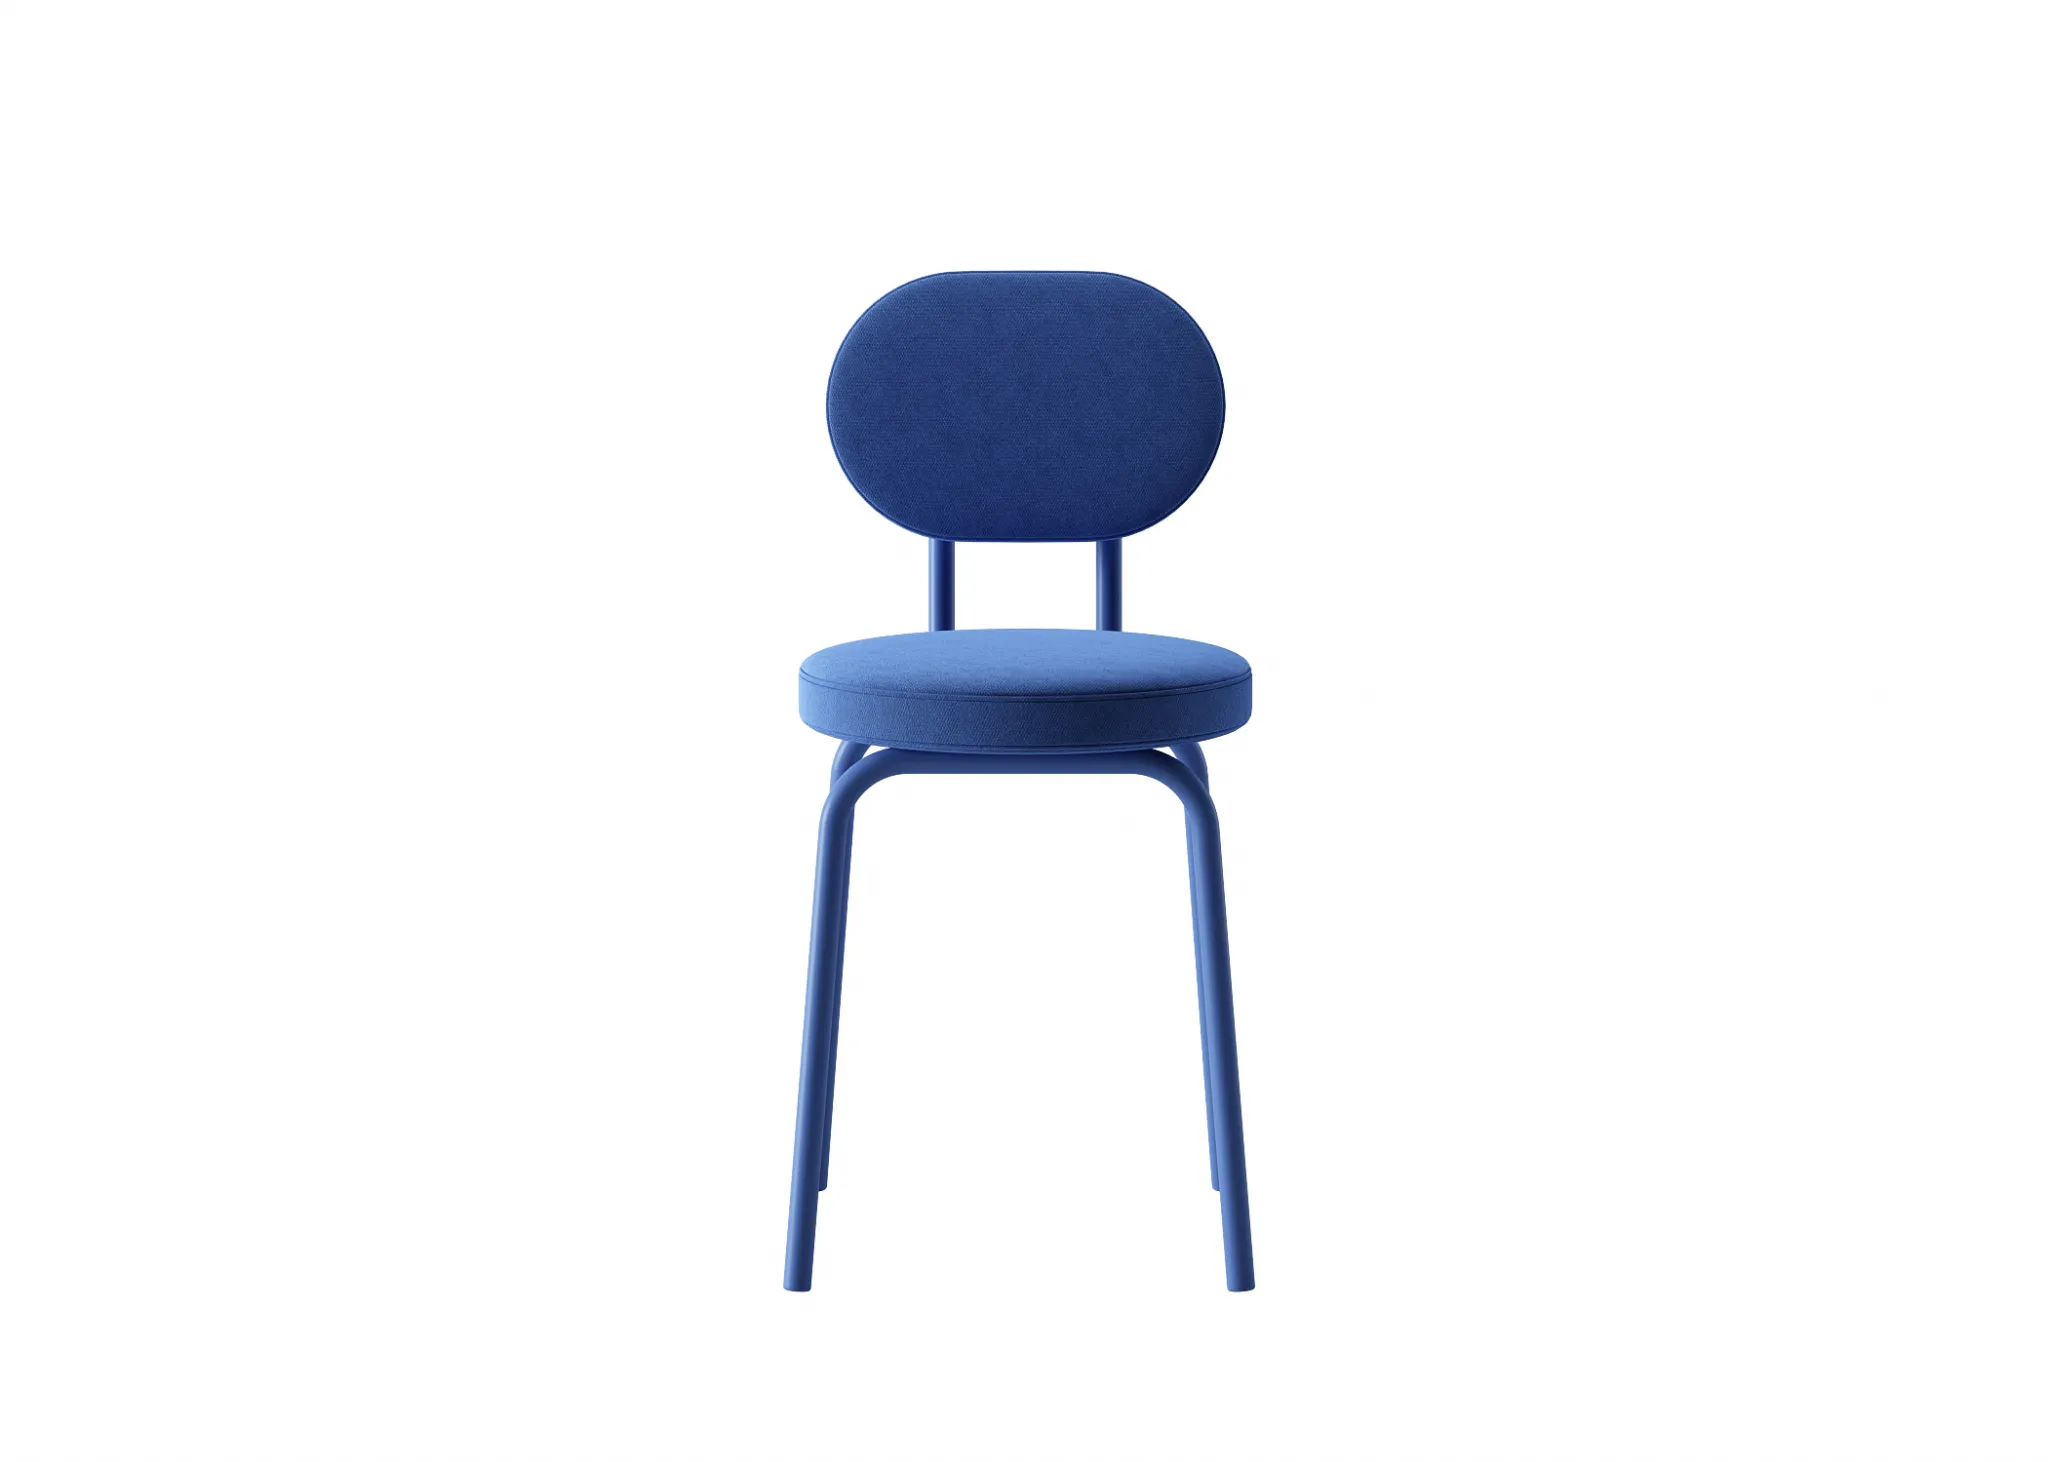 FURNITURE 3D MODELS – CHAIRS – 0311